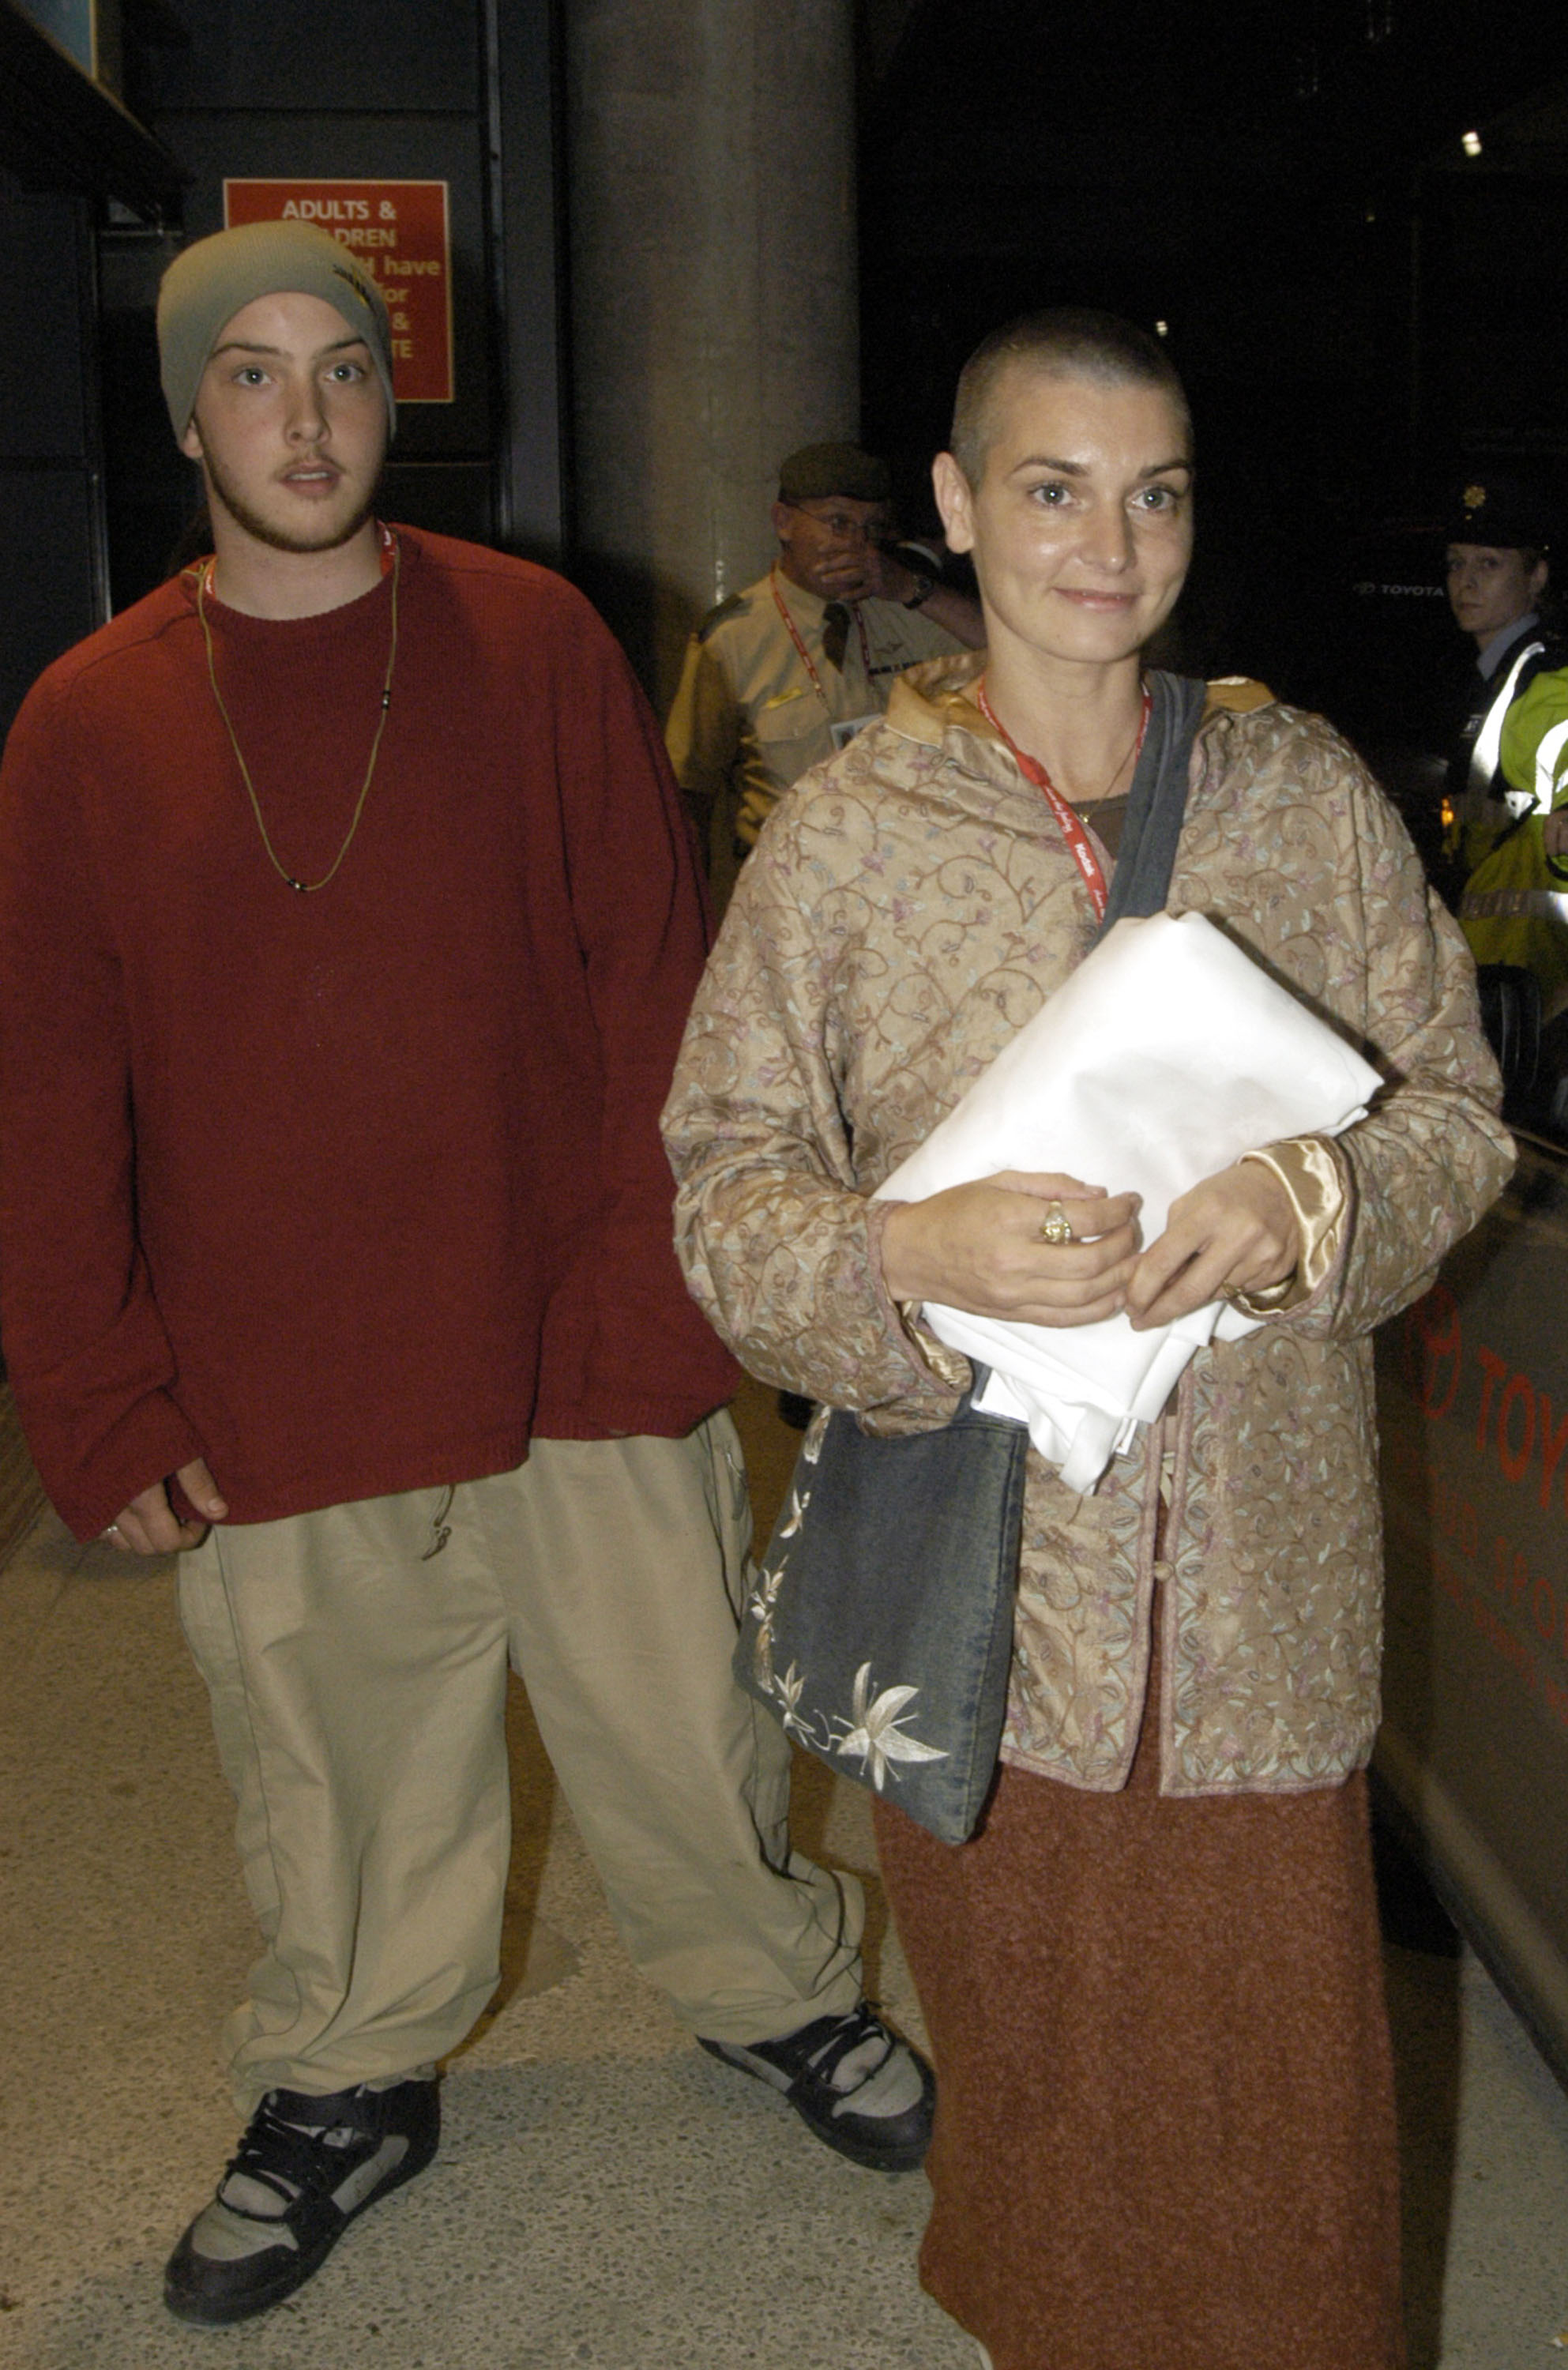 Shane Lunny and Sinead O'Connor on June 21, 2003 in Dublin, Ireland | Source: Getty Images